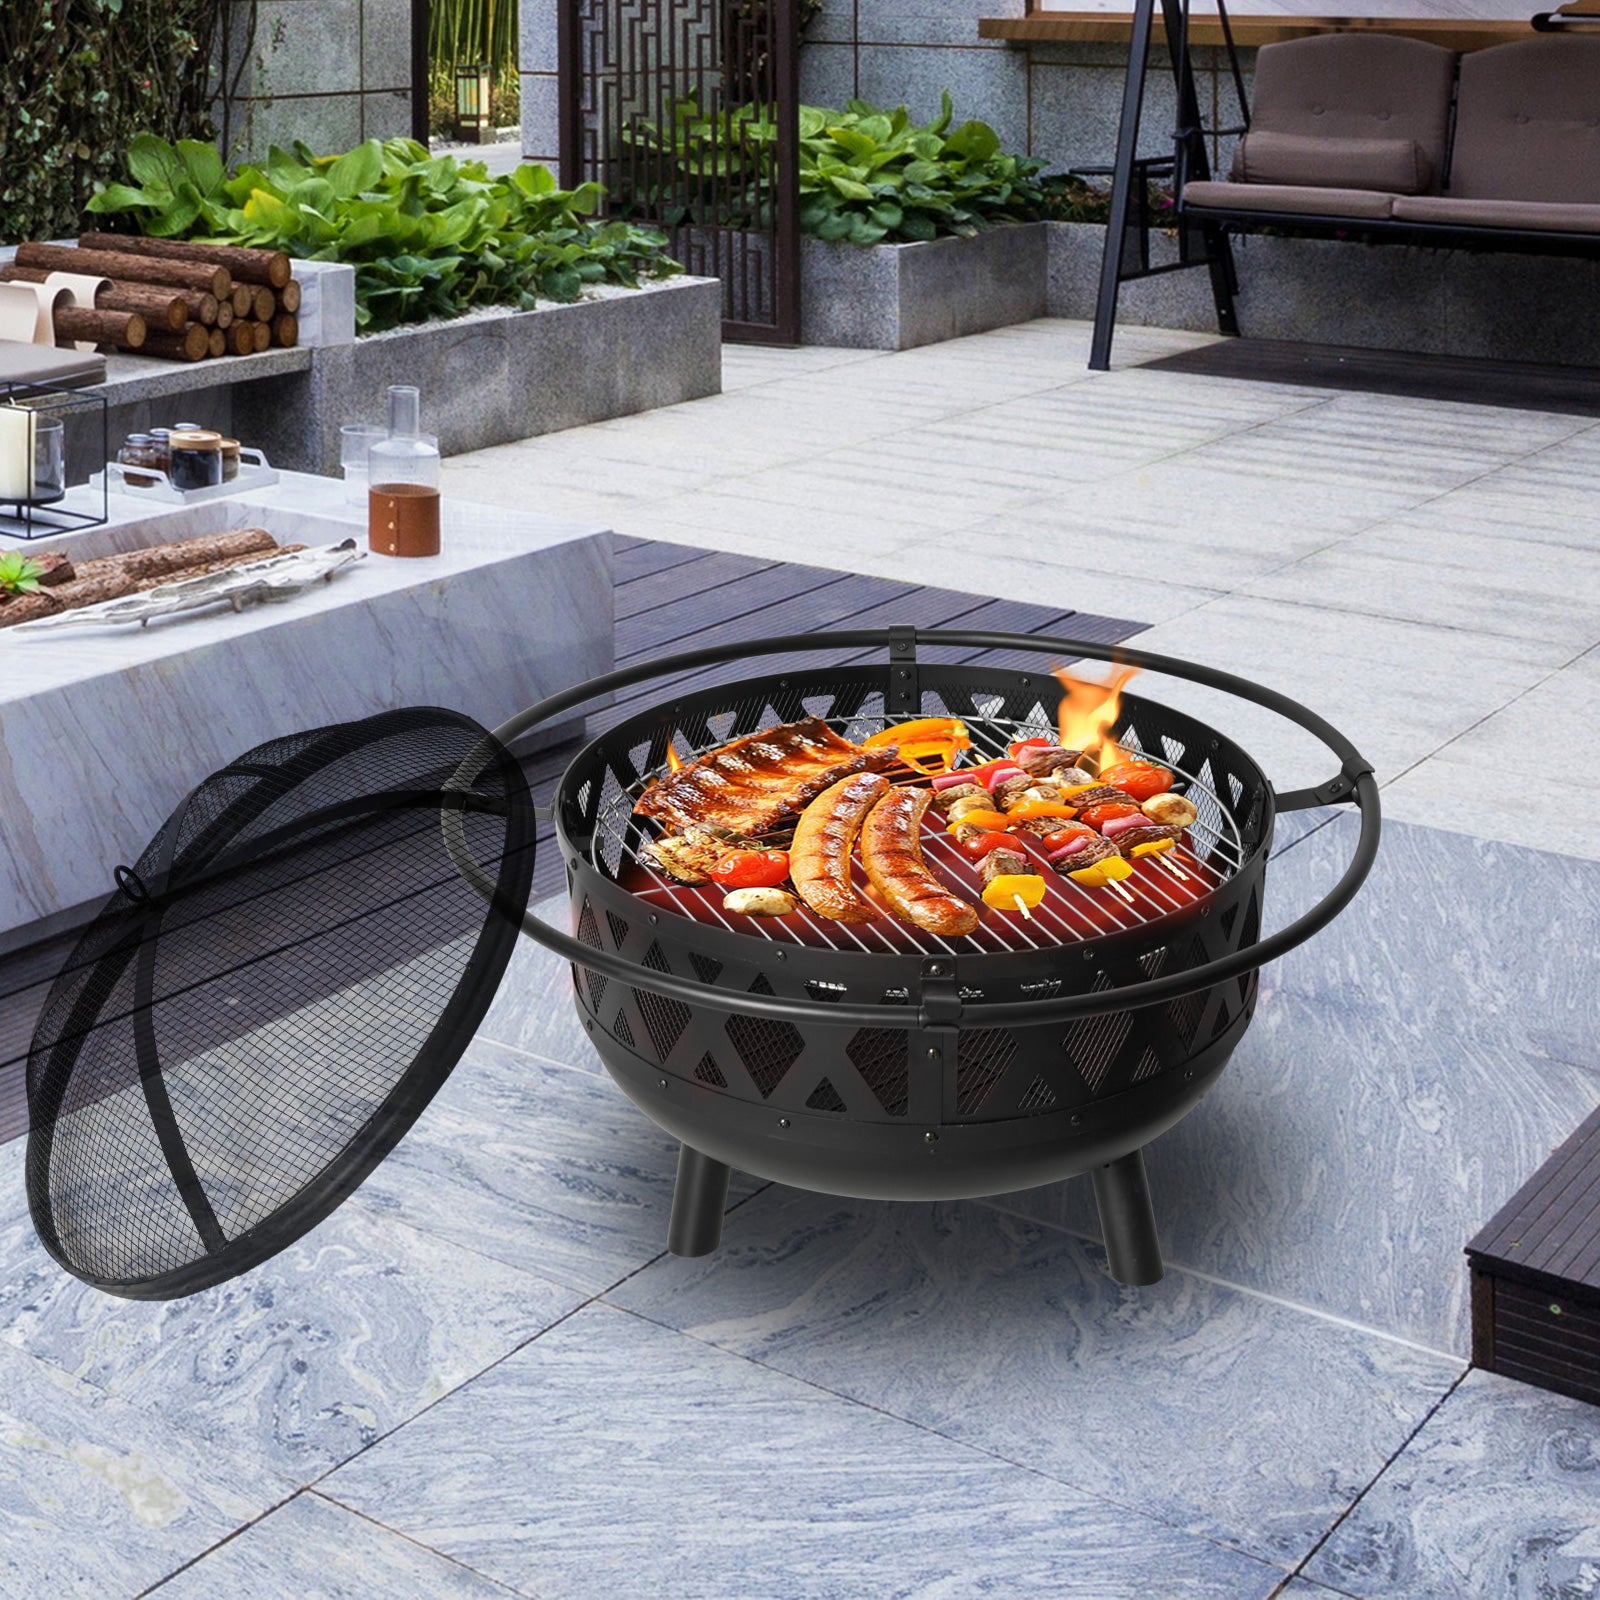 22.8" Round Outdoor Wood Burning Fire Pit with Steel BBQ Grill, Spark Screen and Poker